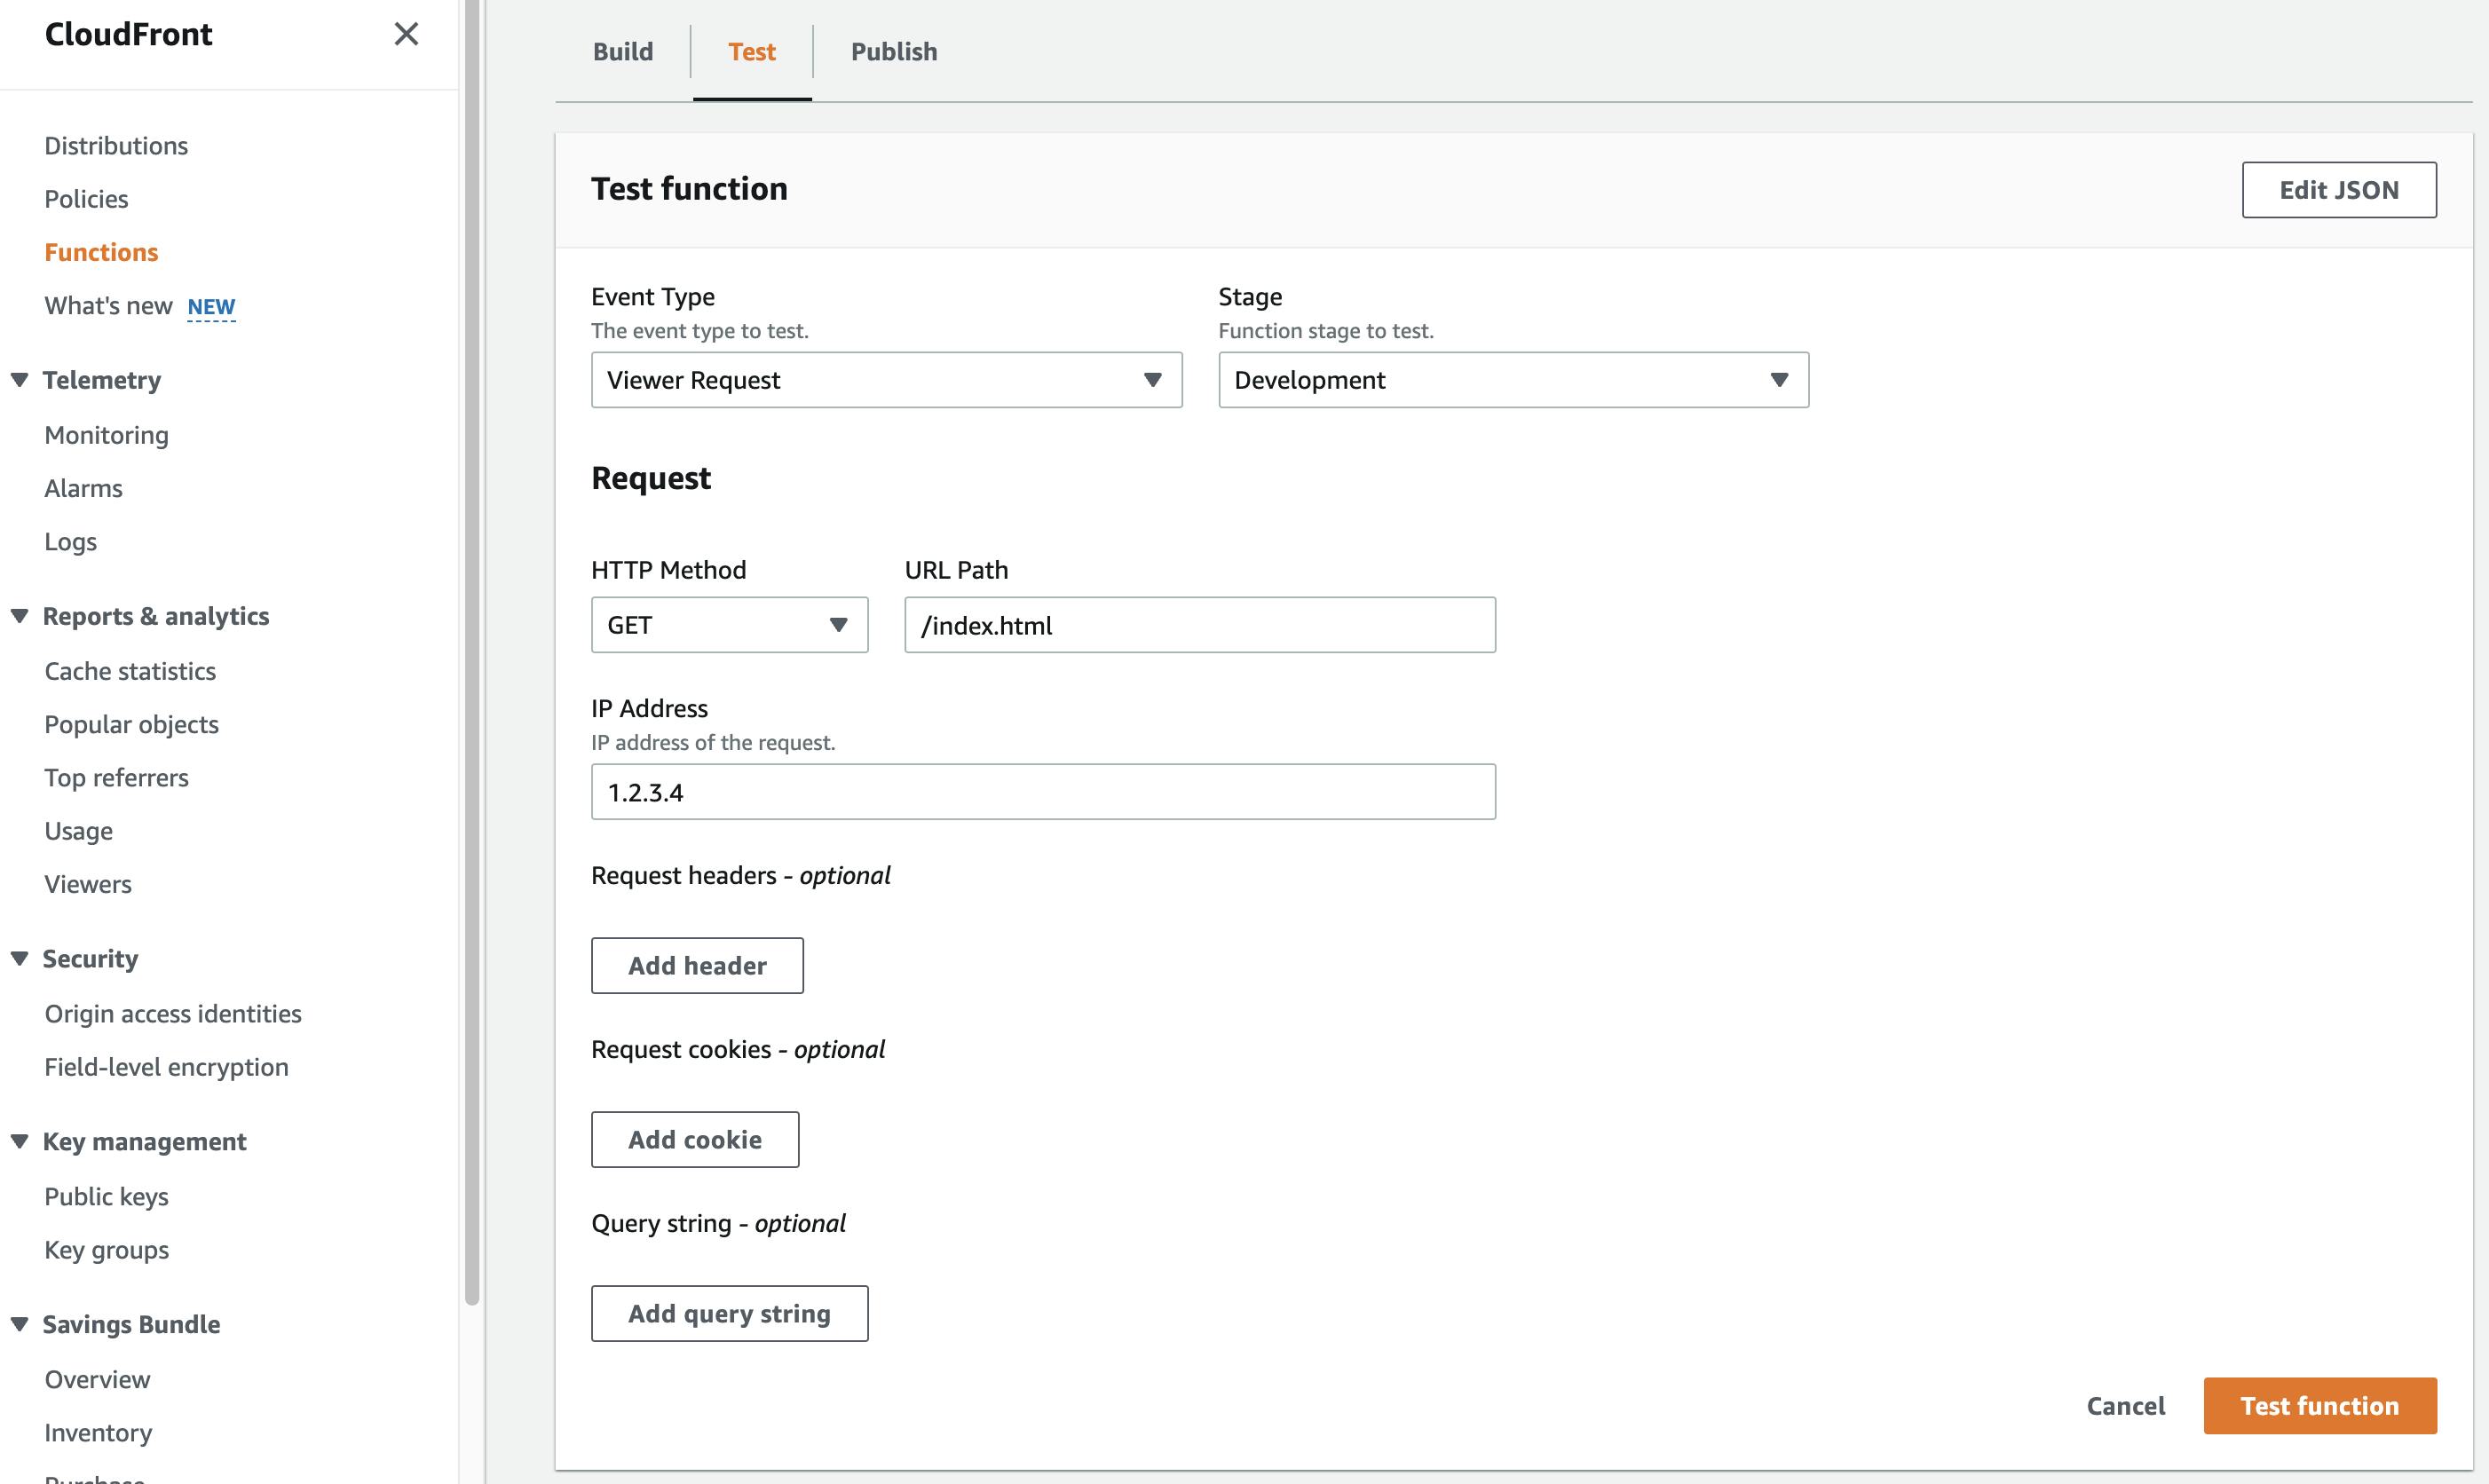 Testing CloudFront Functions from AWS Console